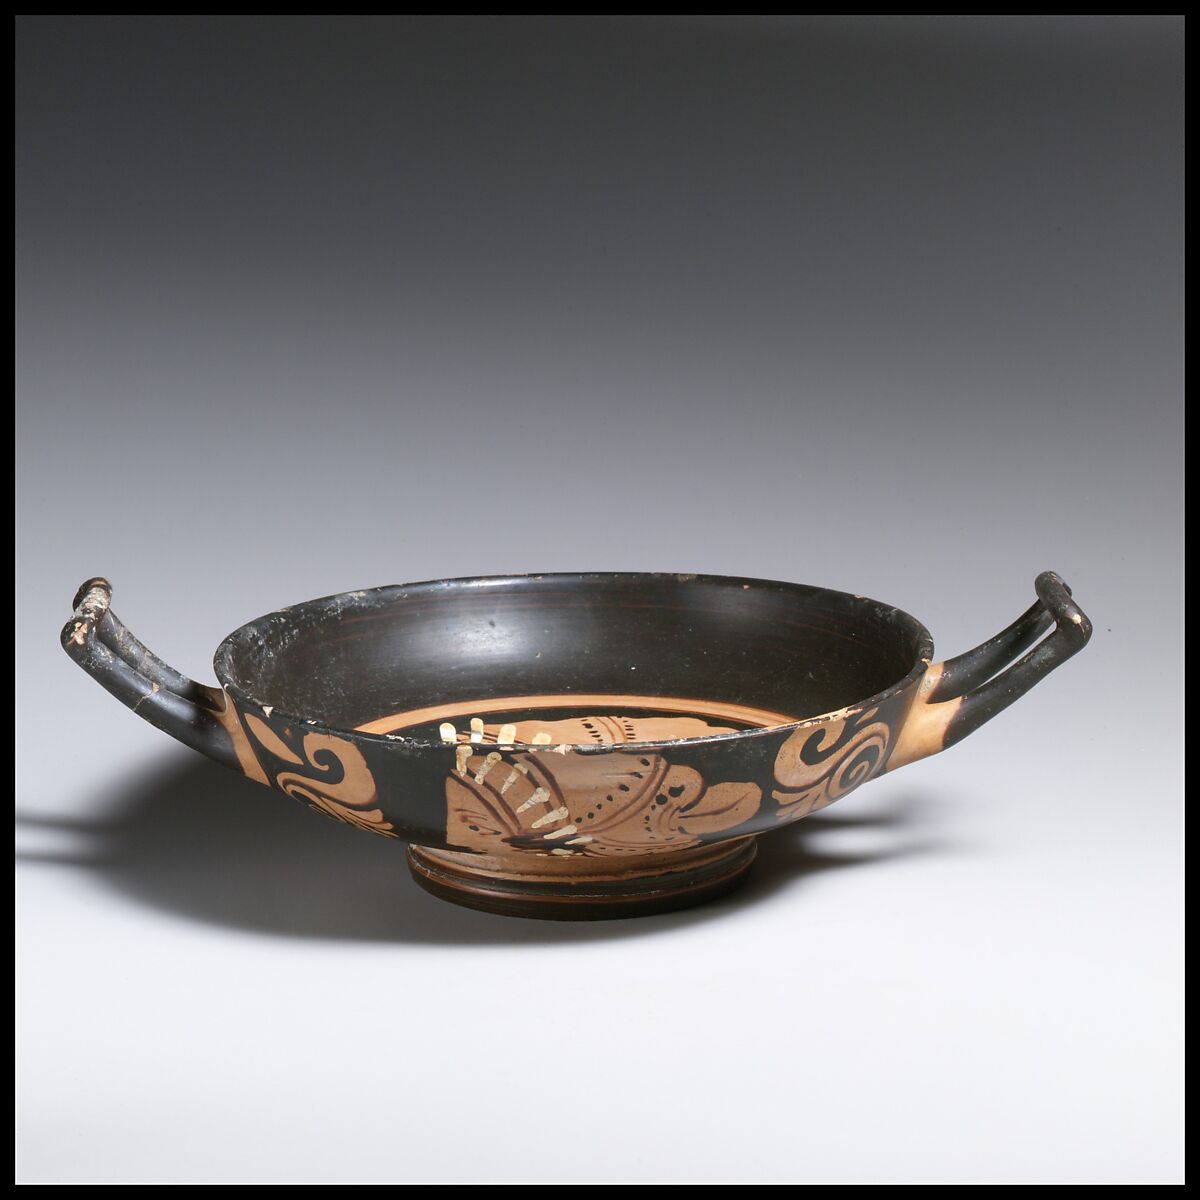 Terracotta stemless kylix (drinking cup), Attributed to the St. Antimo Group, Terracotta, Greek, South Italian, Campanian 